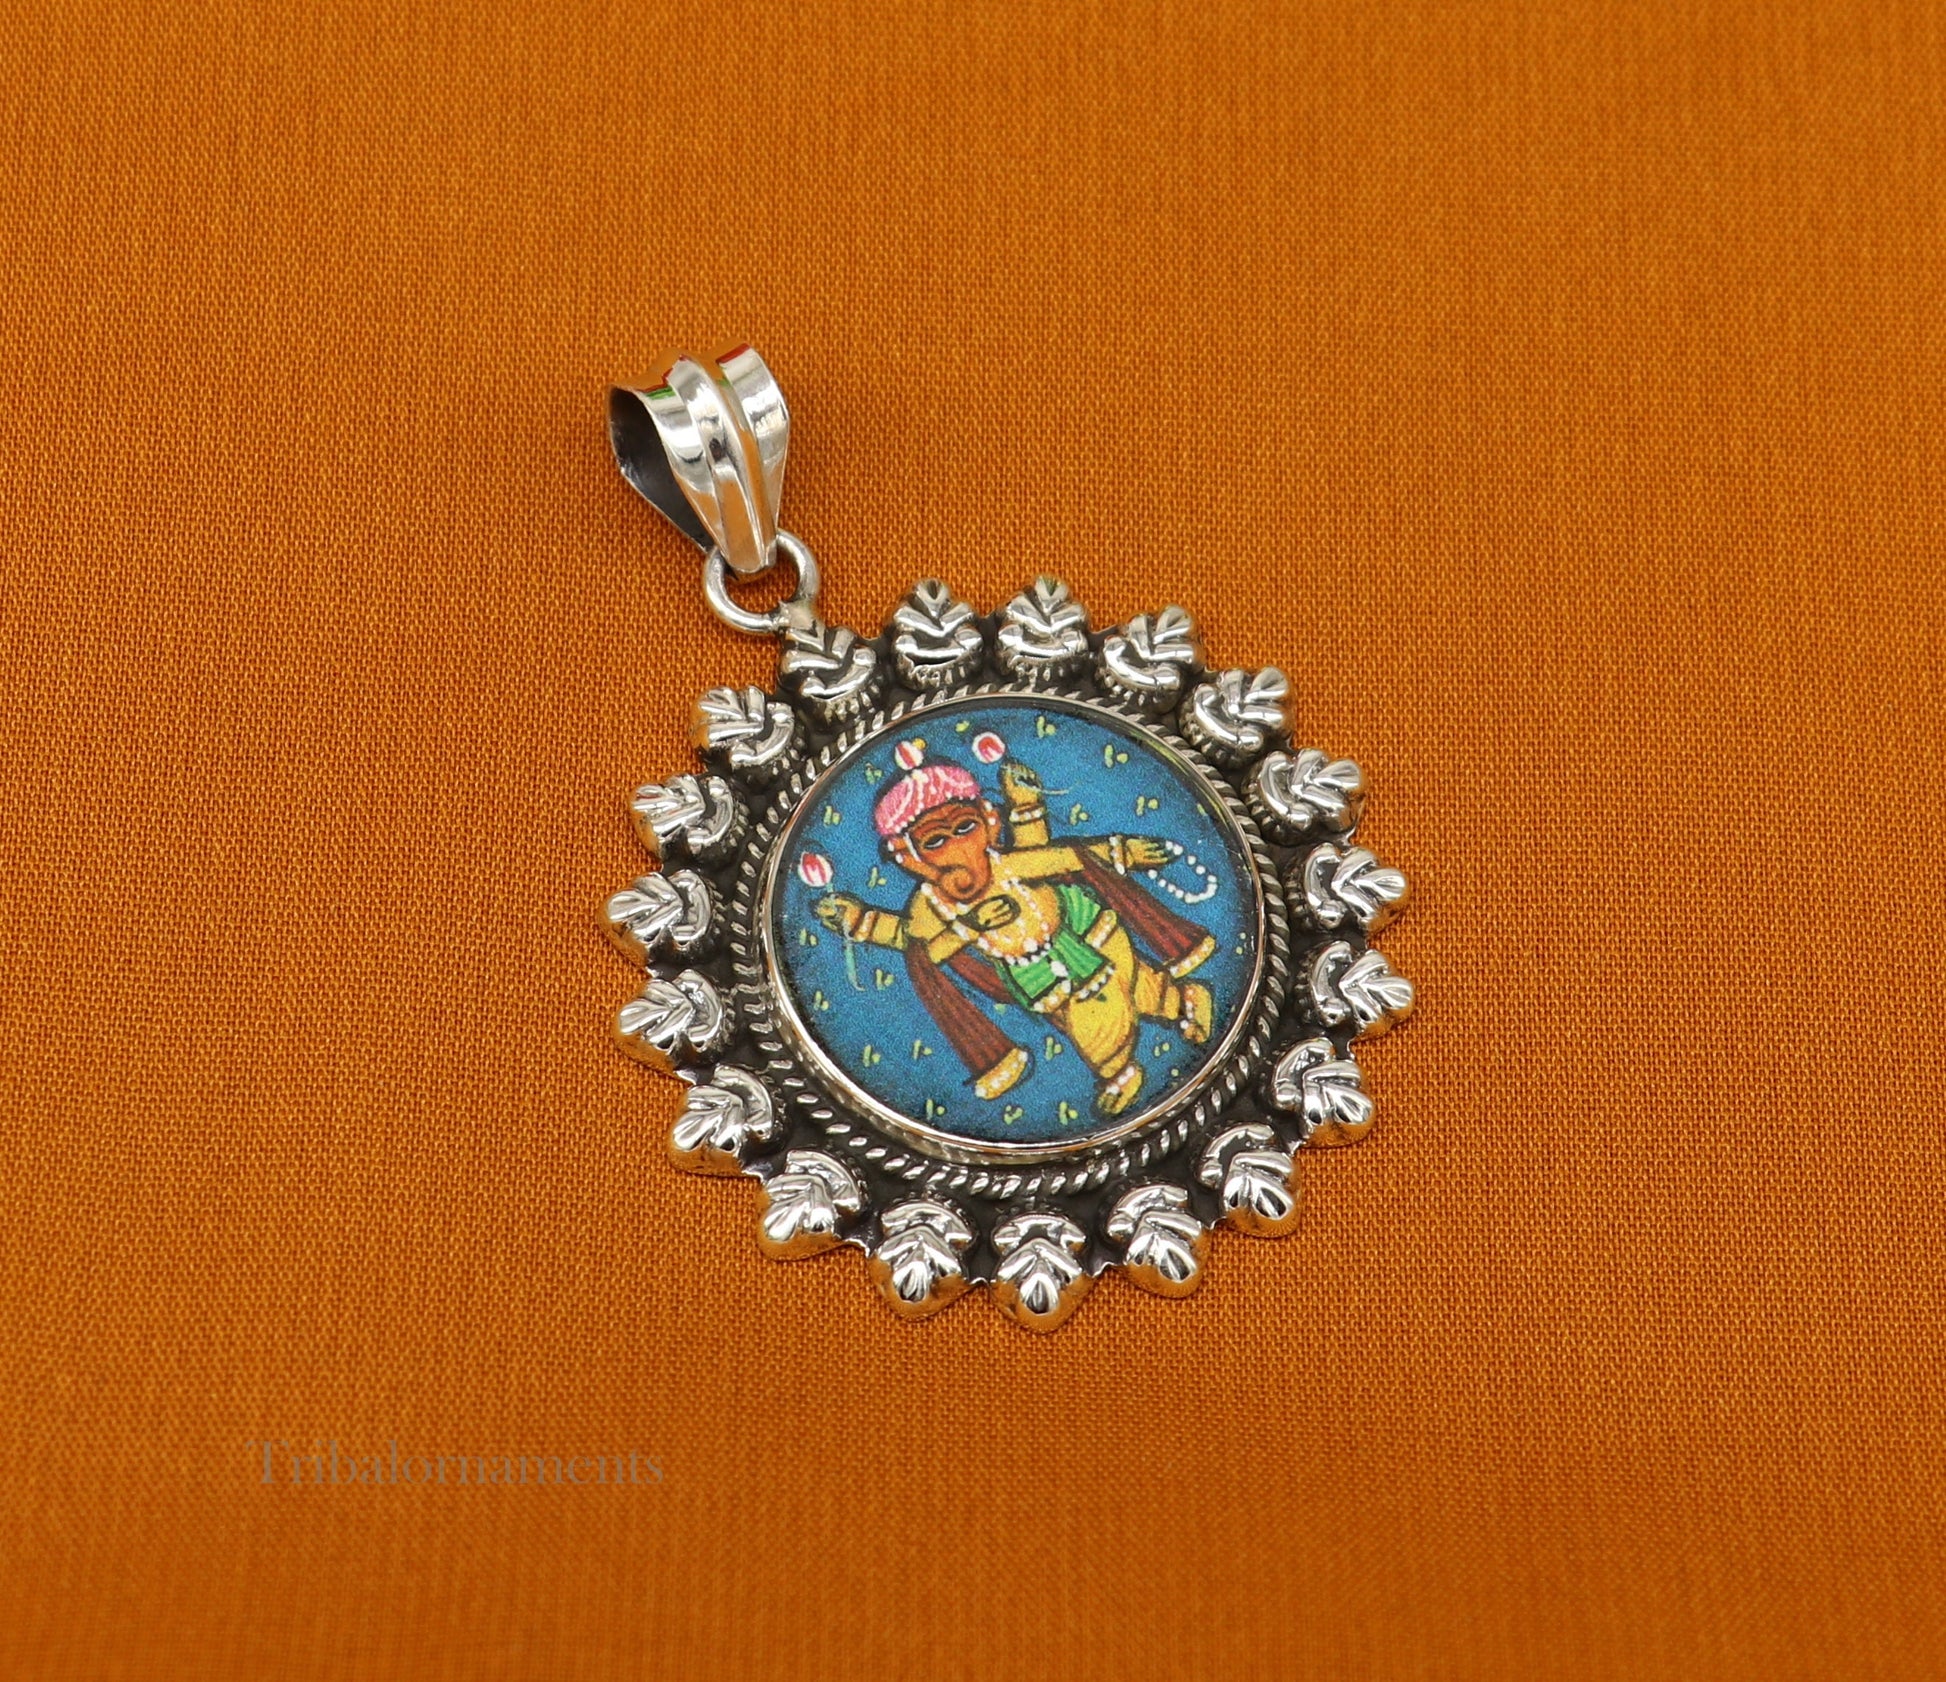 92.5 Sterling Silver Lord Ganesh Pendant Hand Painted Miniature Art Painting photo with Glass Framed Pendant ethnic stylish jewelry ssp812 - TRIBAL ORNAMENTS